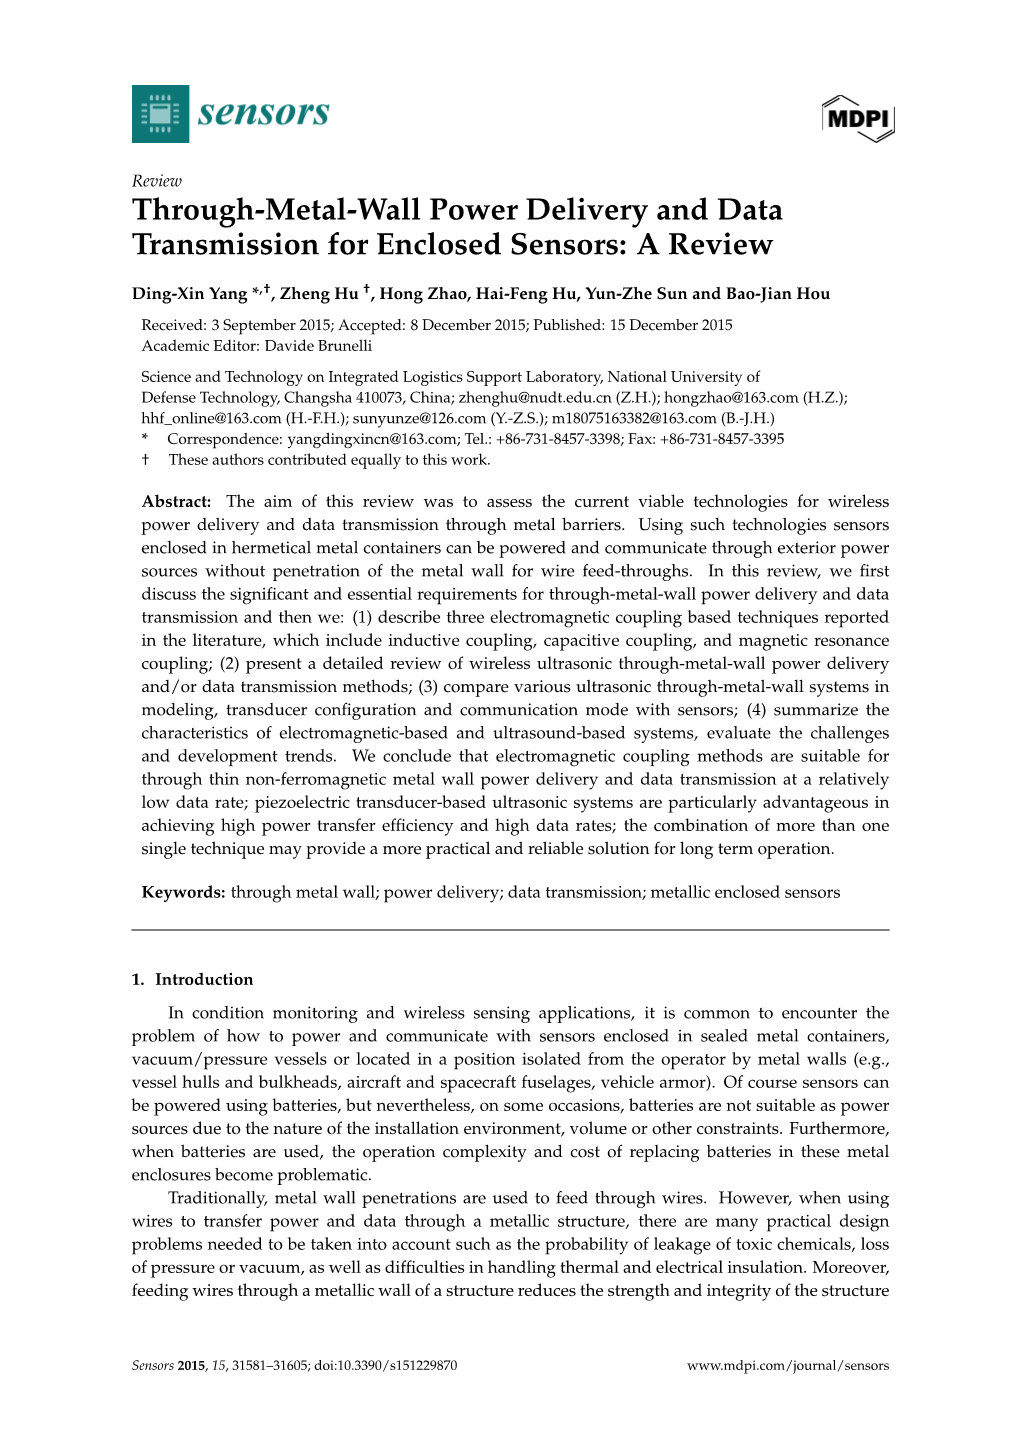 Through-Metal-Wall Power Delivery and Data Transmission for Enclosed Sensors: a Review